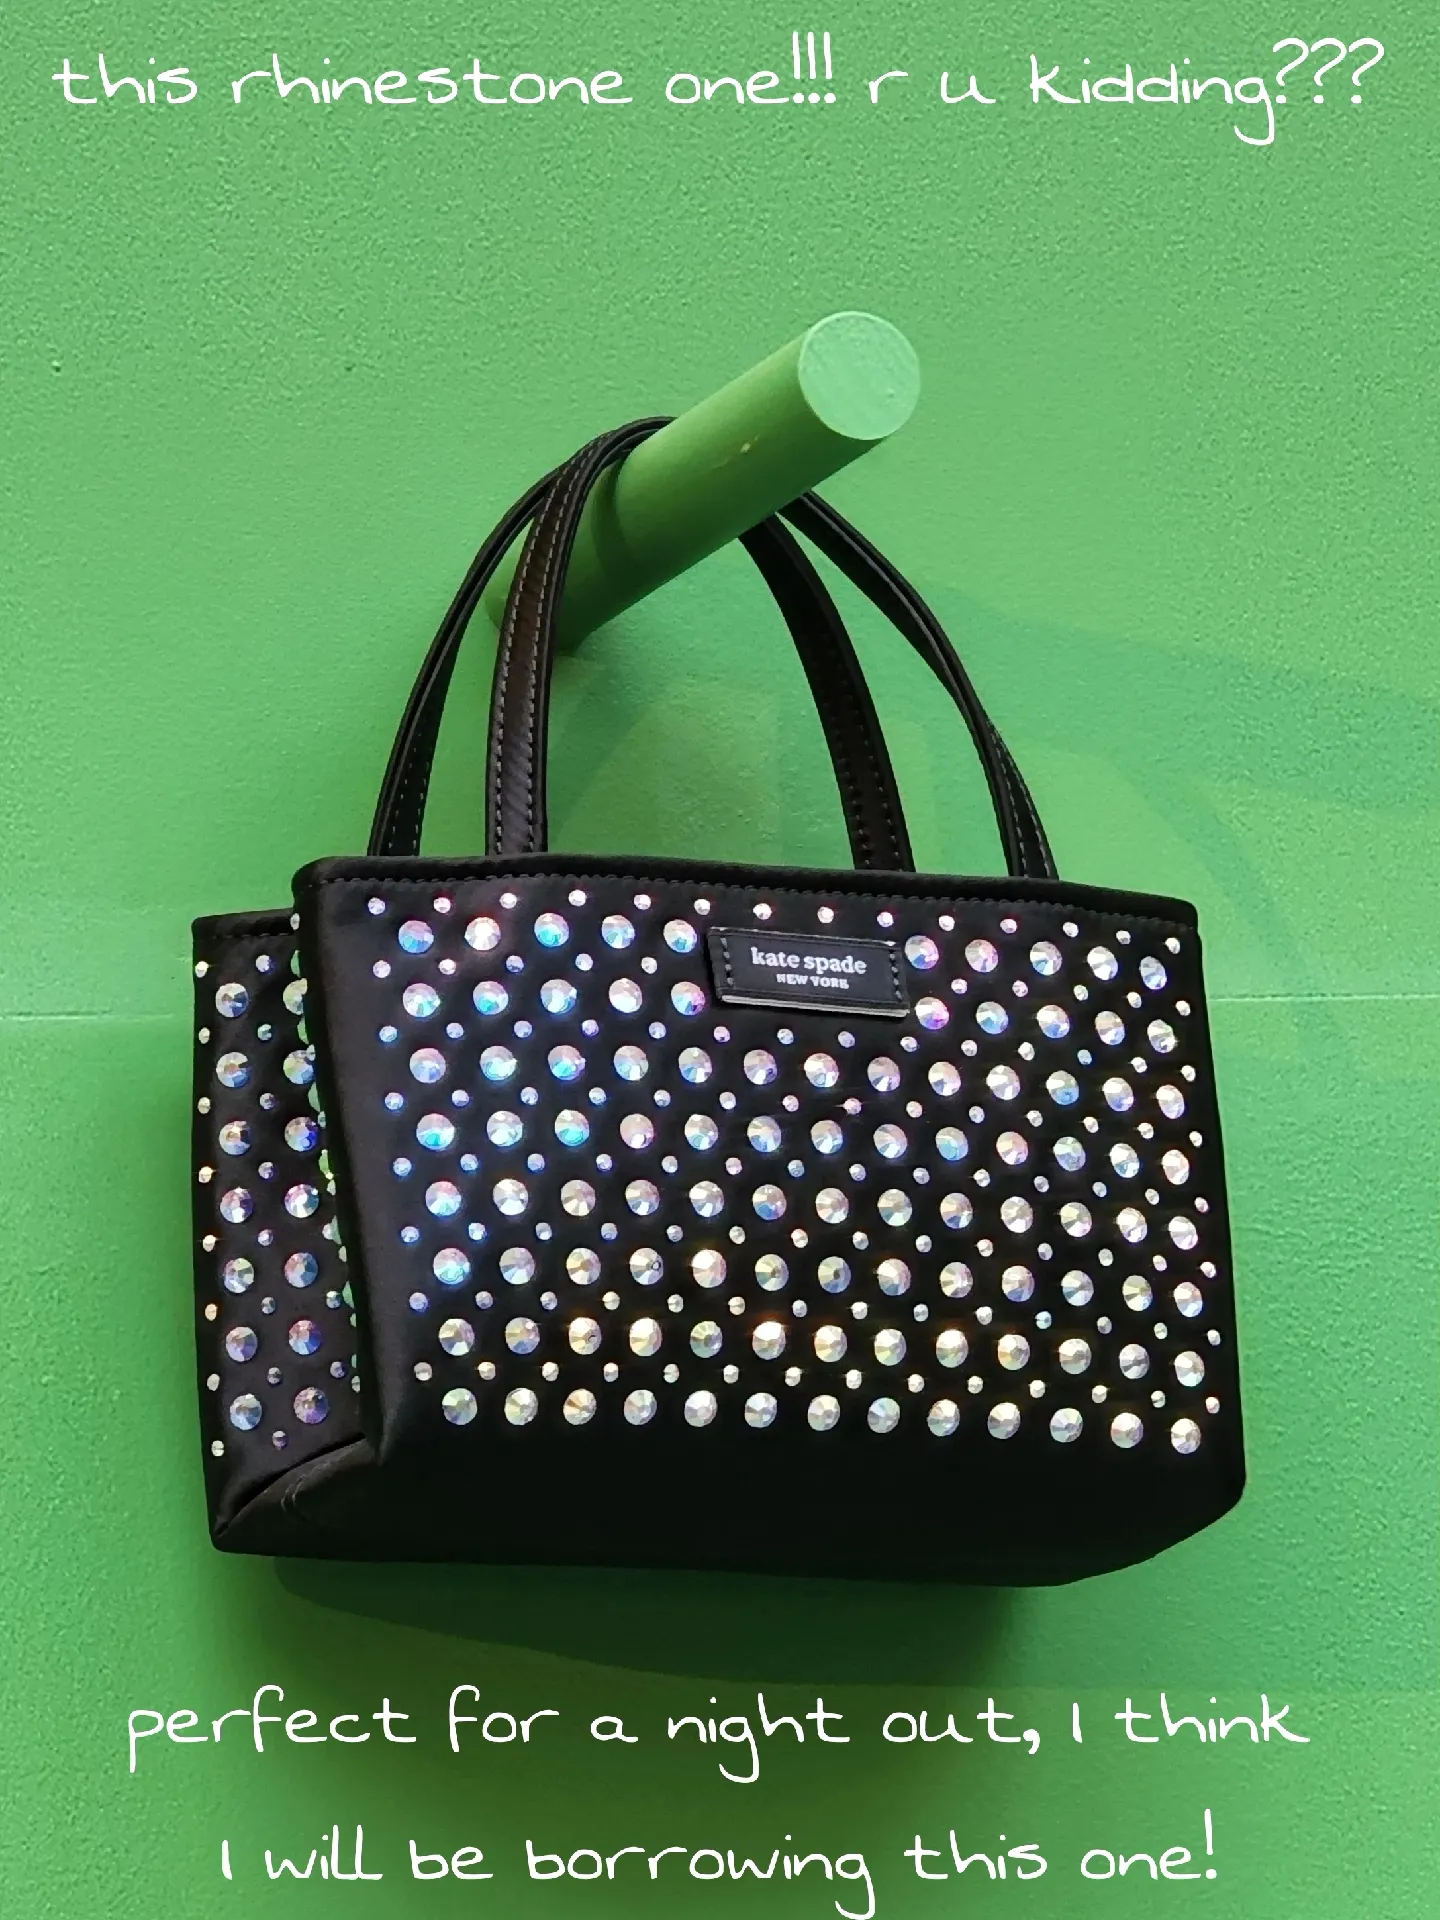 favorite bags from Kate Spade borrow-a-bag in NYC⭐ | Gallery